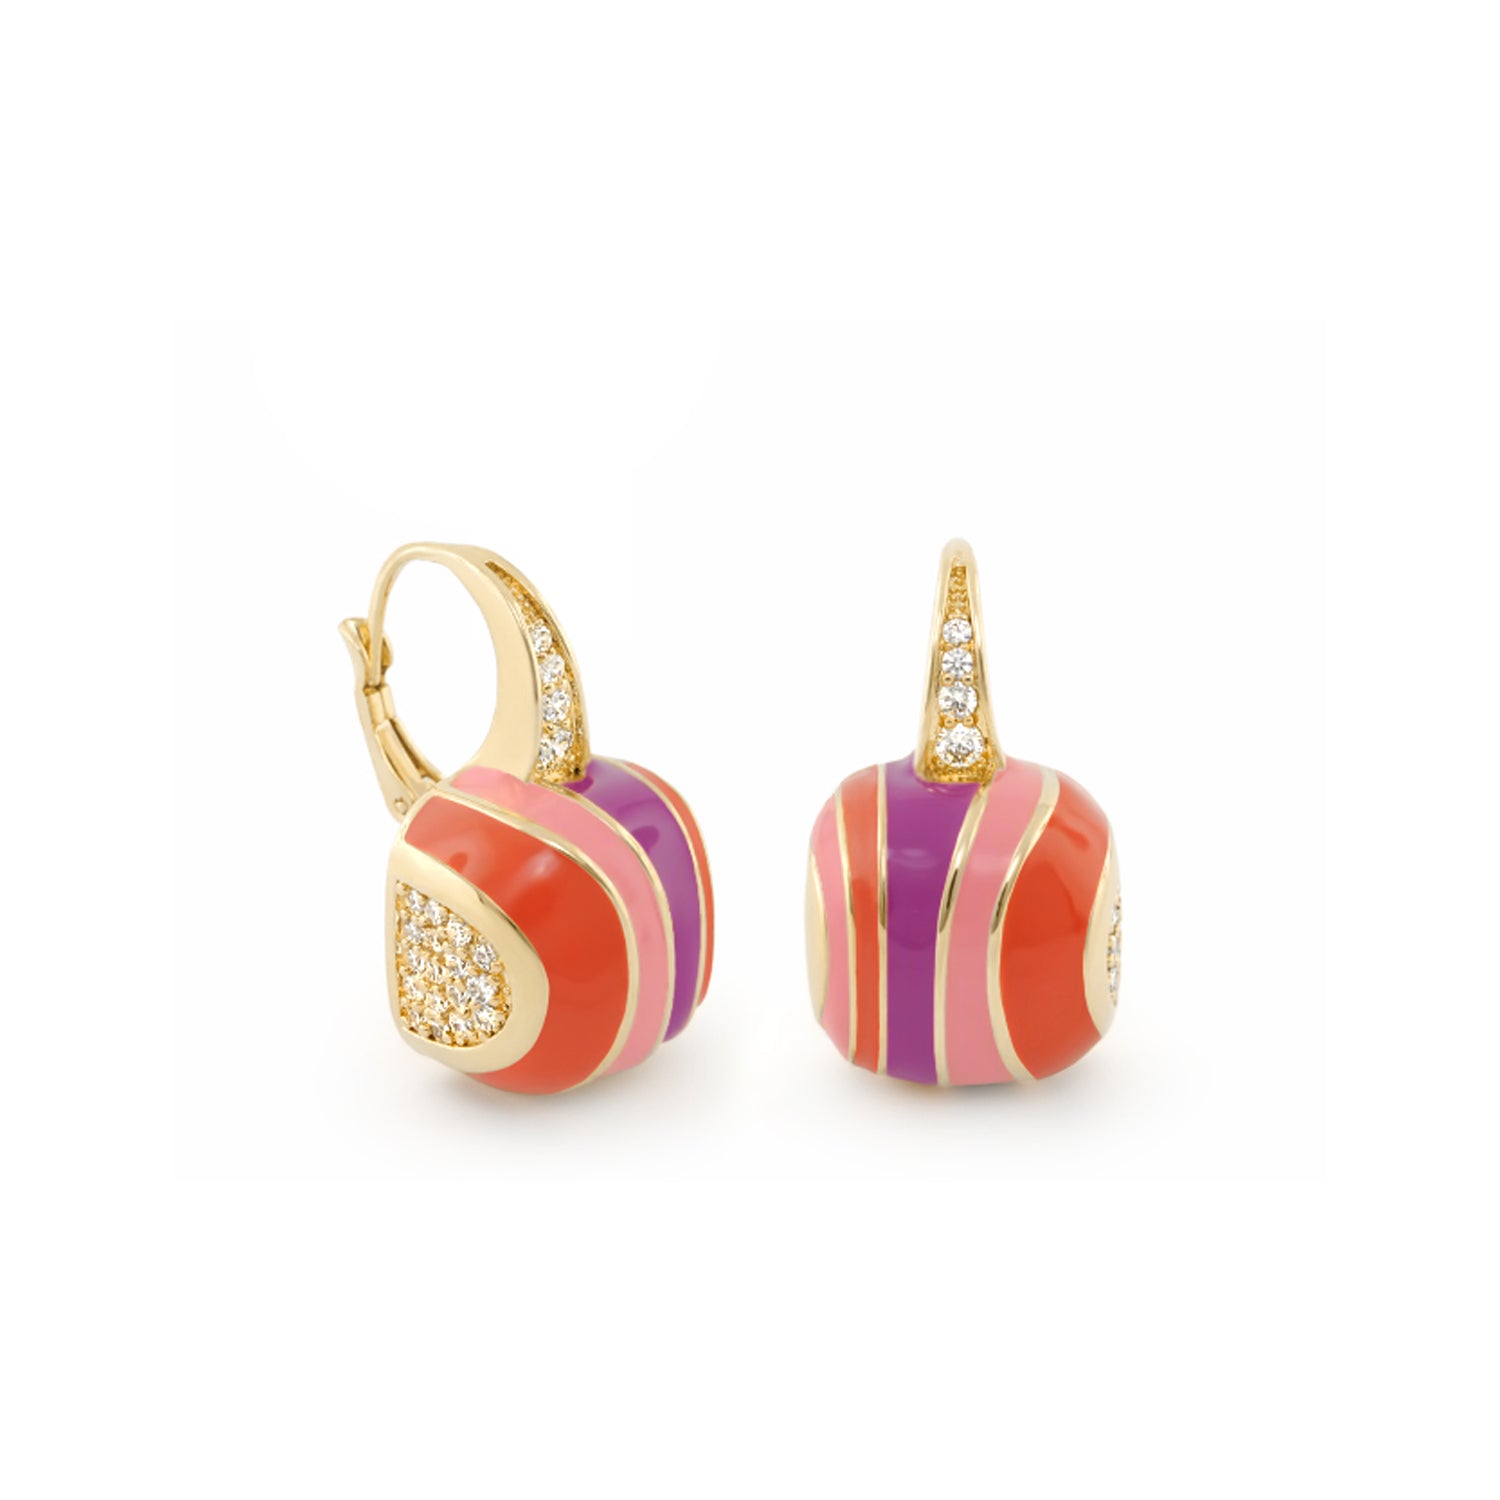 Stripes of Pave Earring